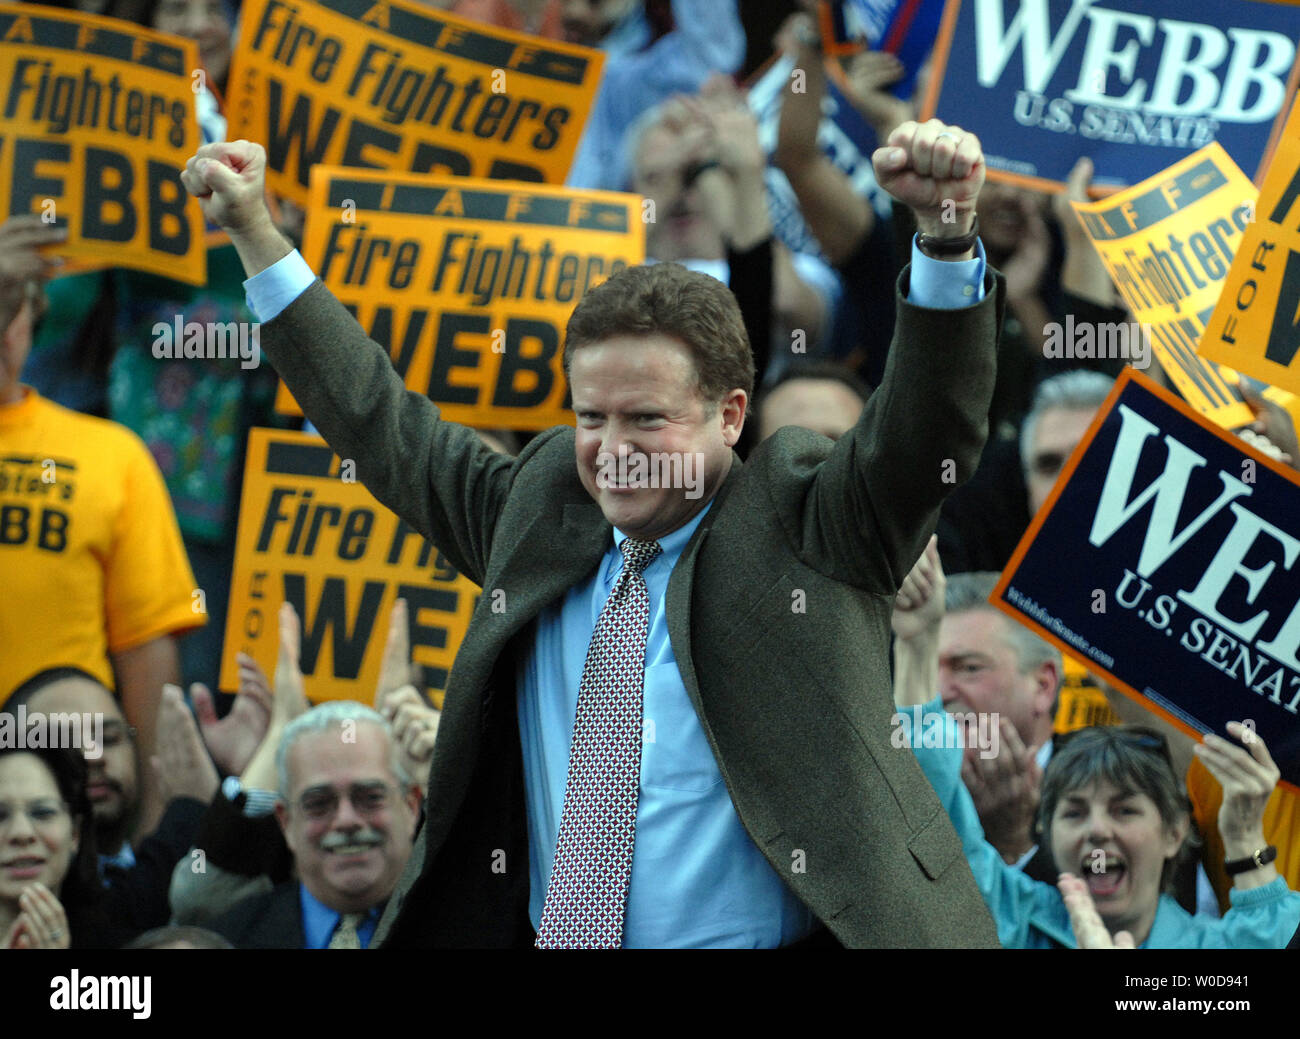 Virginia Democratic Senatorial Candidate Jim Webb arrives to speak to supporters after his opponent Sen. George Allen (R-VA) conceded the closely contested race on November 9, 2006, in Arlington, Virginia.    (UPI Photo/Roger L. Wollenberg) Stock Photo